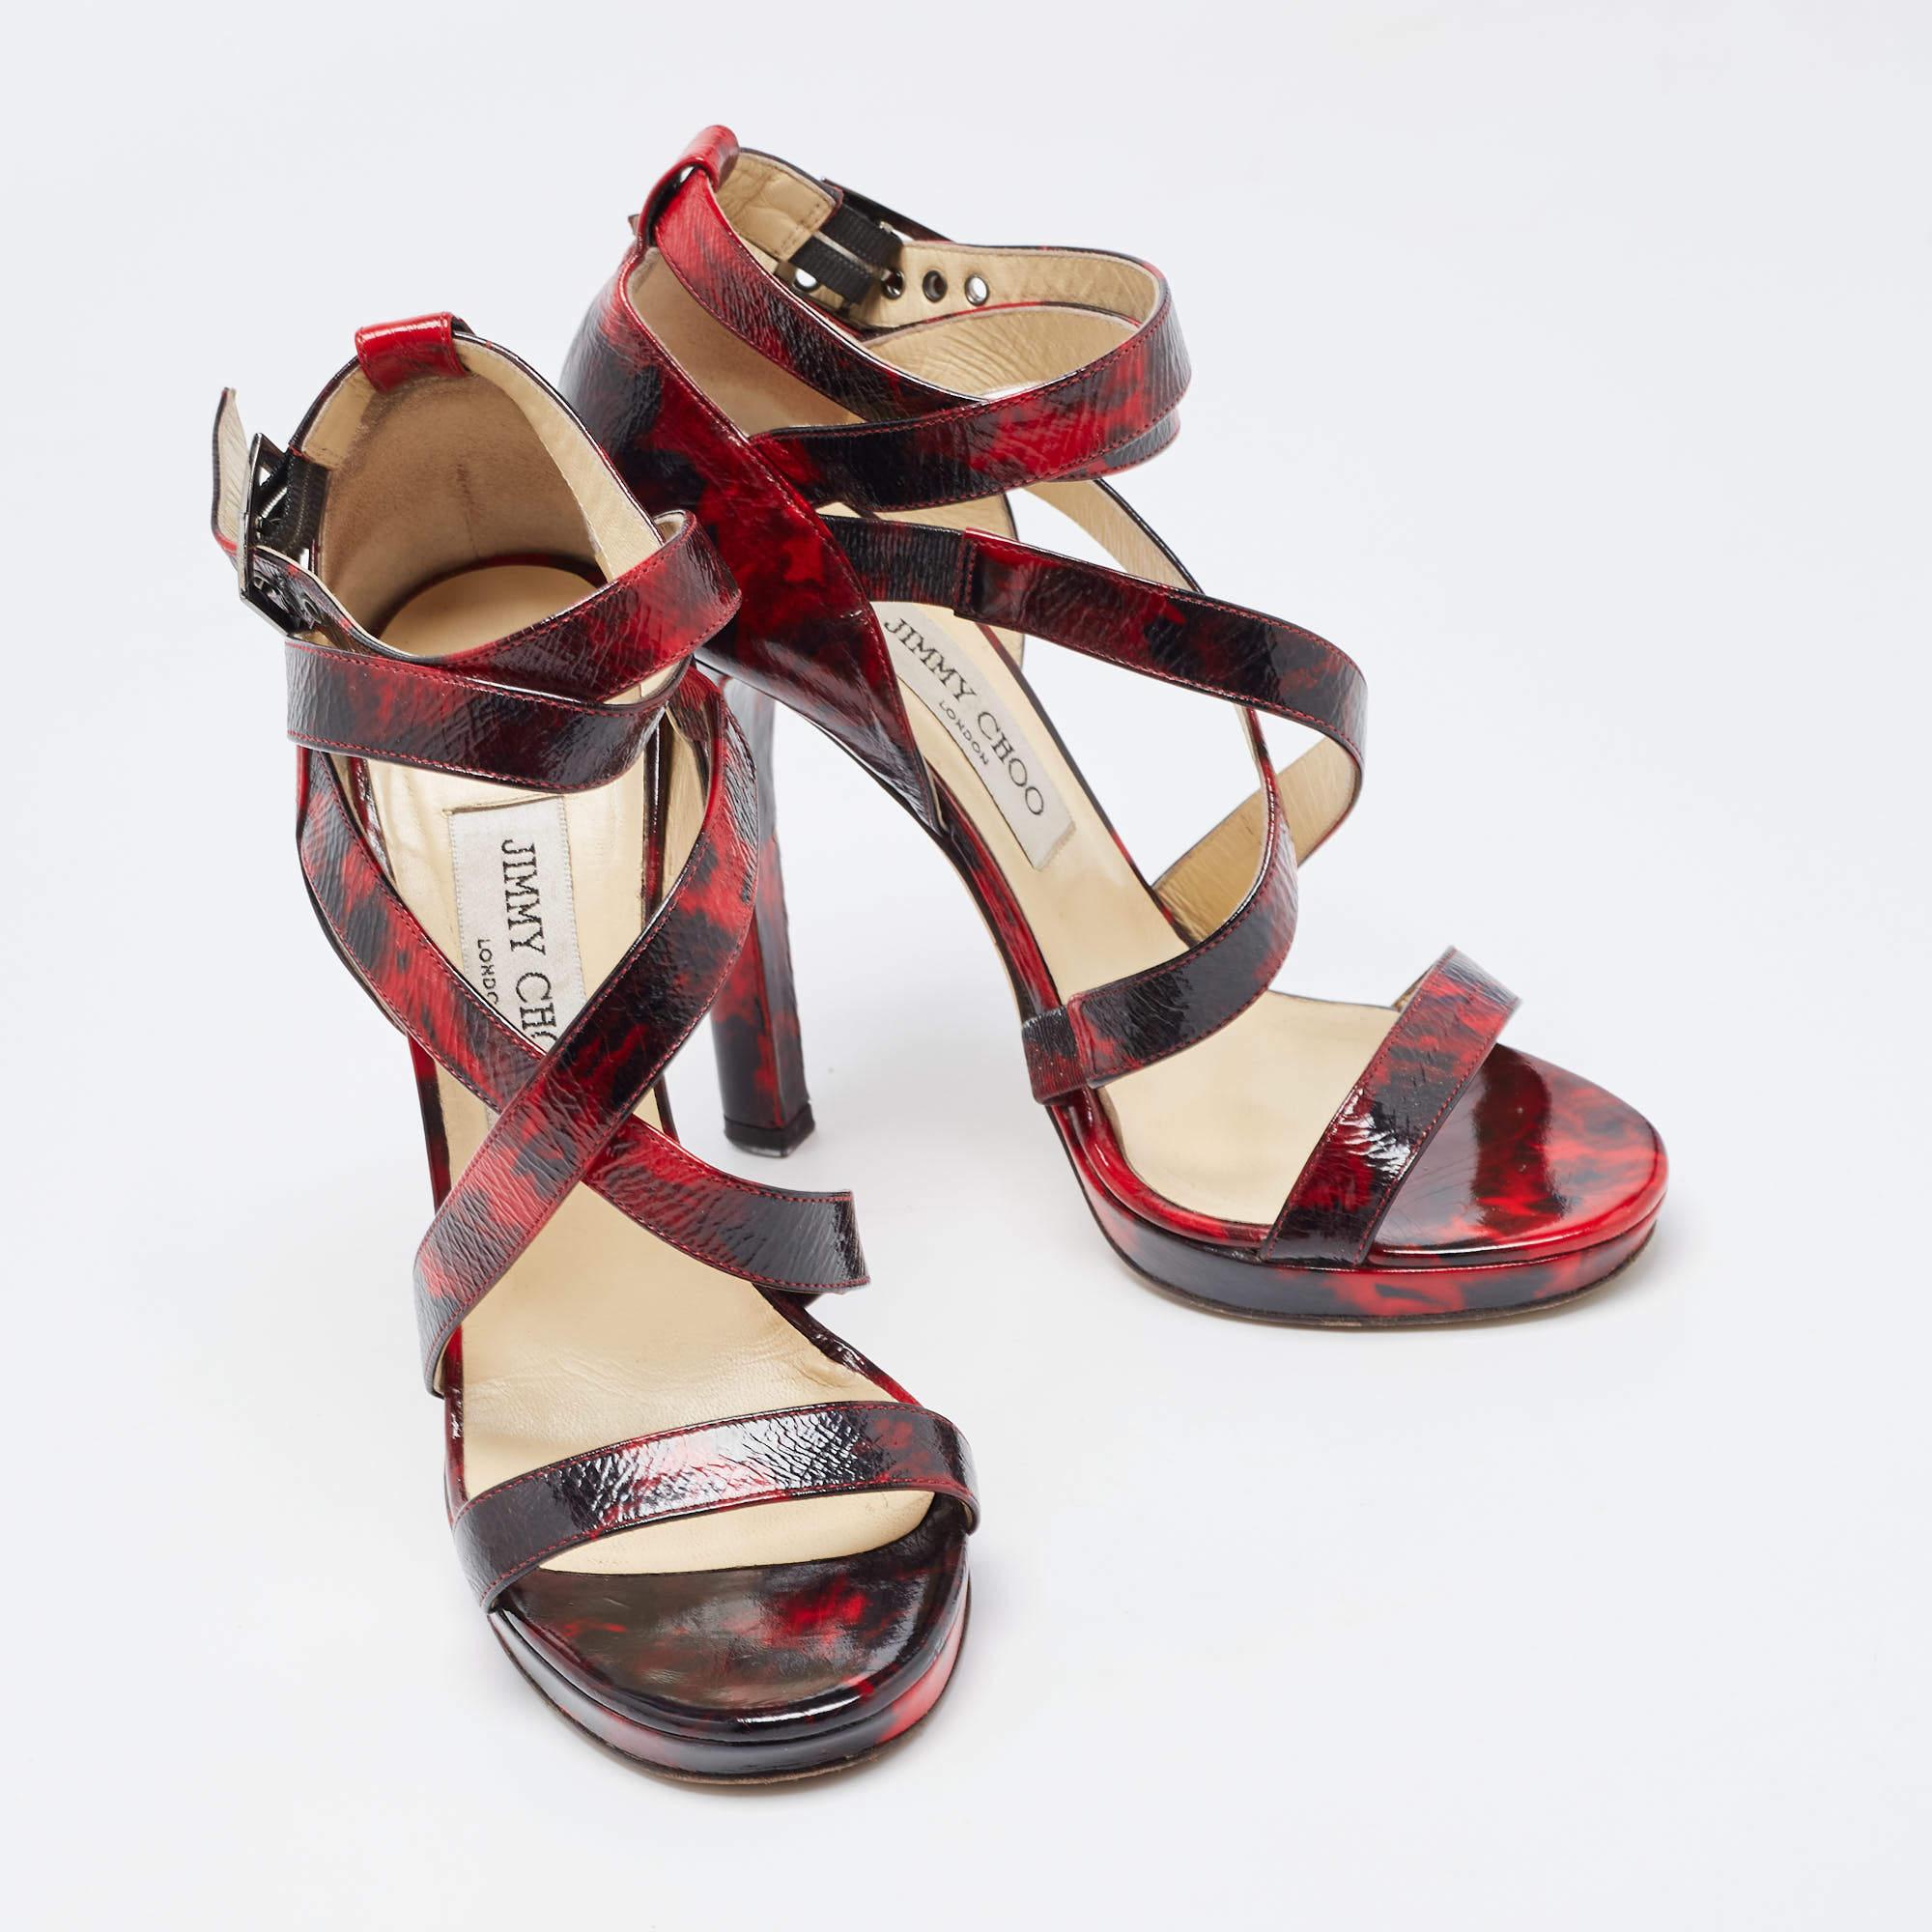 Jimmy Choo Red/Black Leather Criss Cross Ankle Strap Sandals Size 37.5 For Sale 2